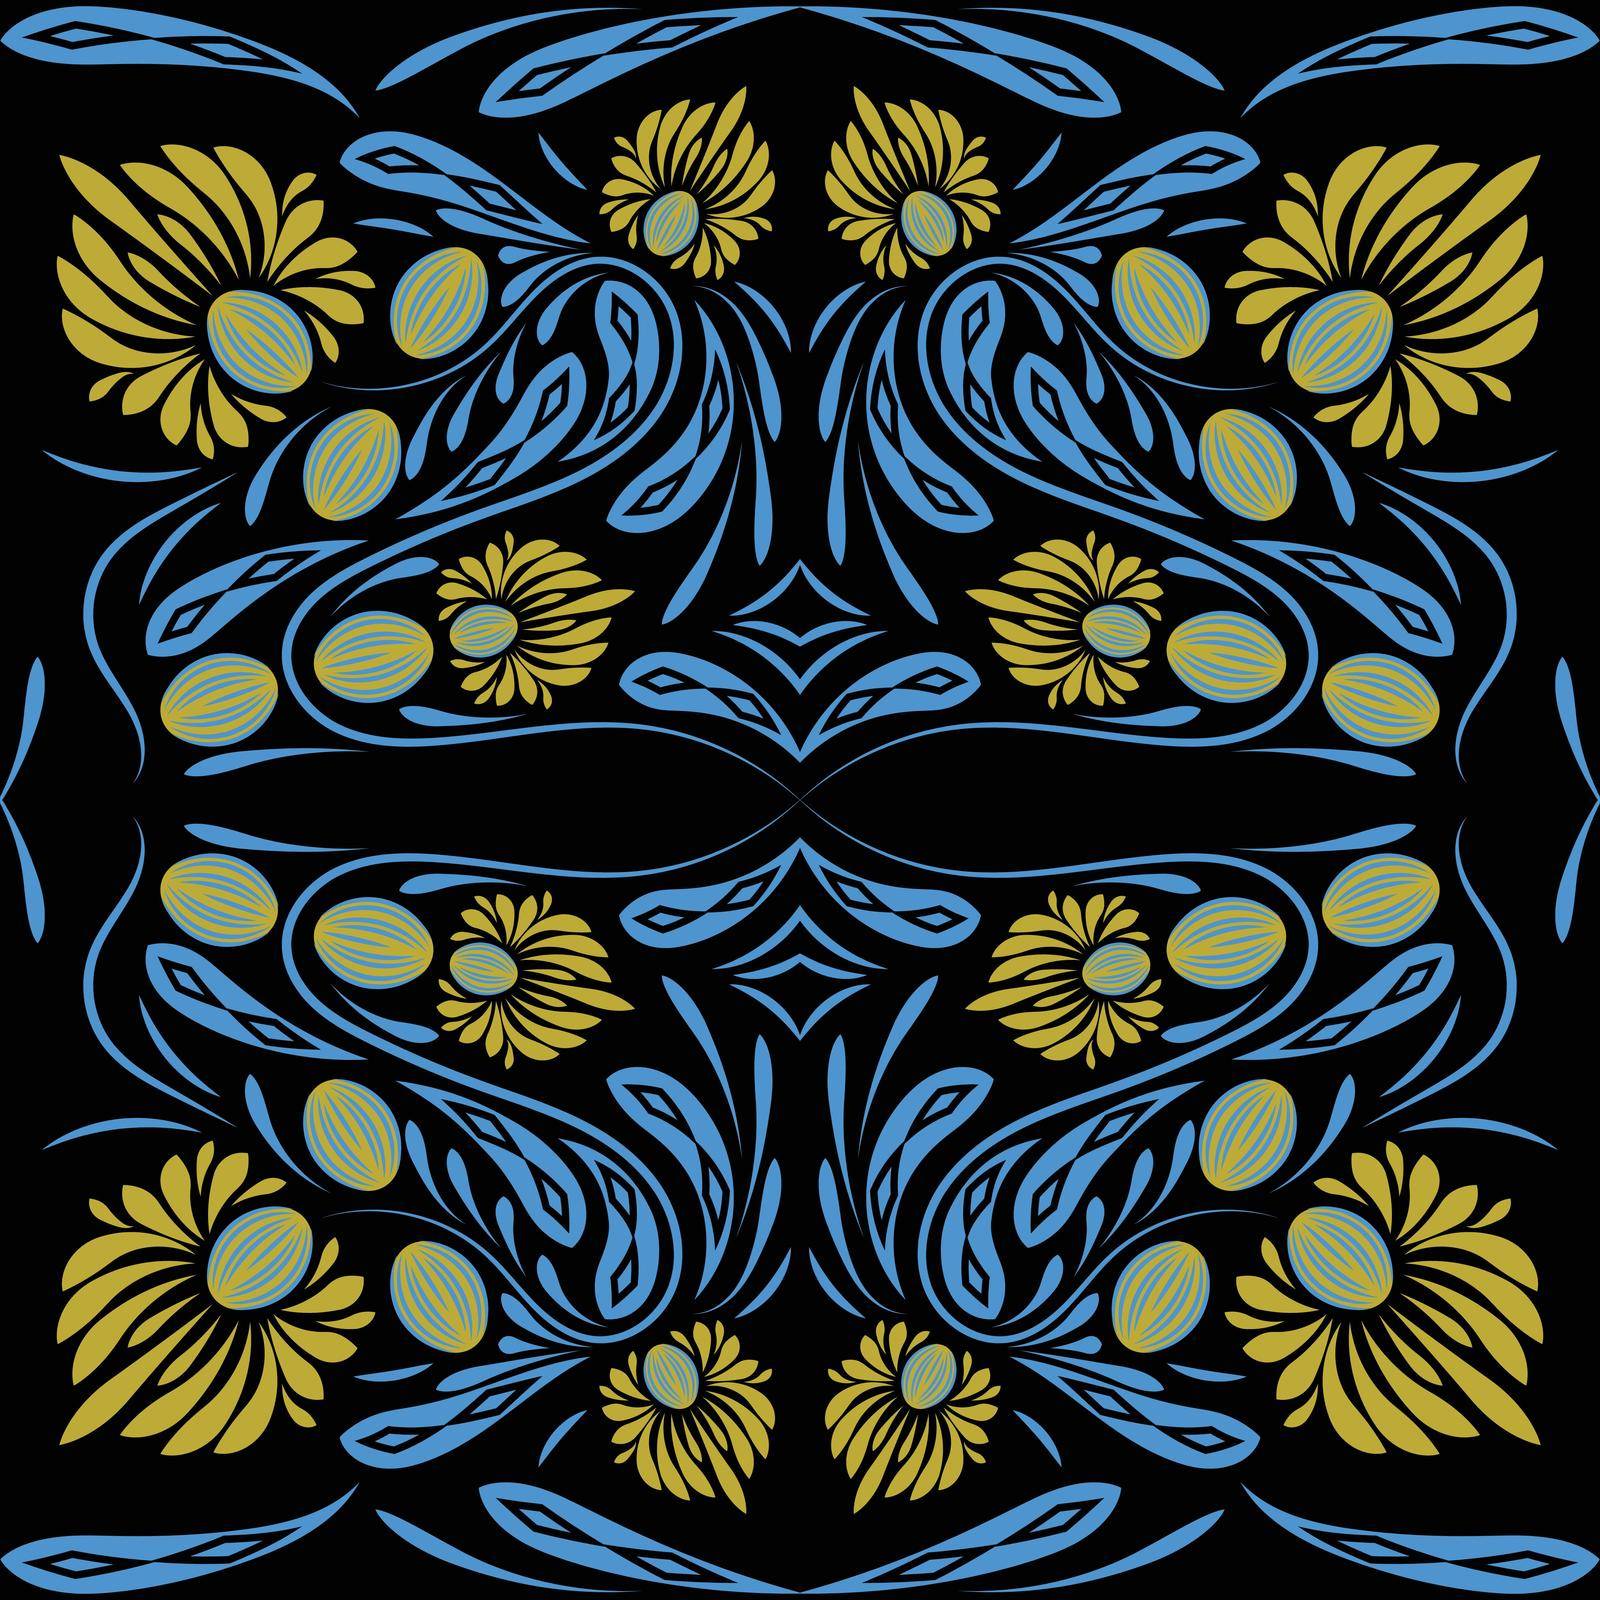 Floral pattern with flowers and leaves  Fantasy flowers Abstract Floral geometric fantasy       